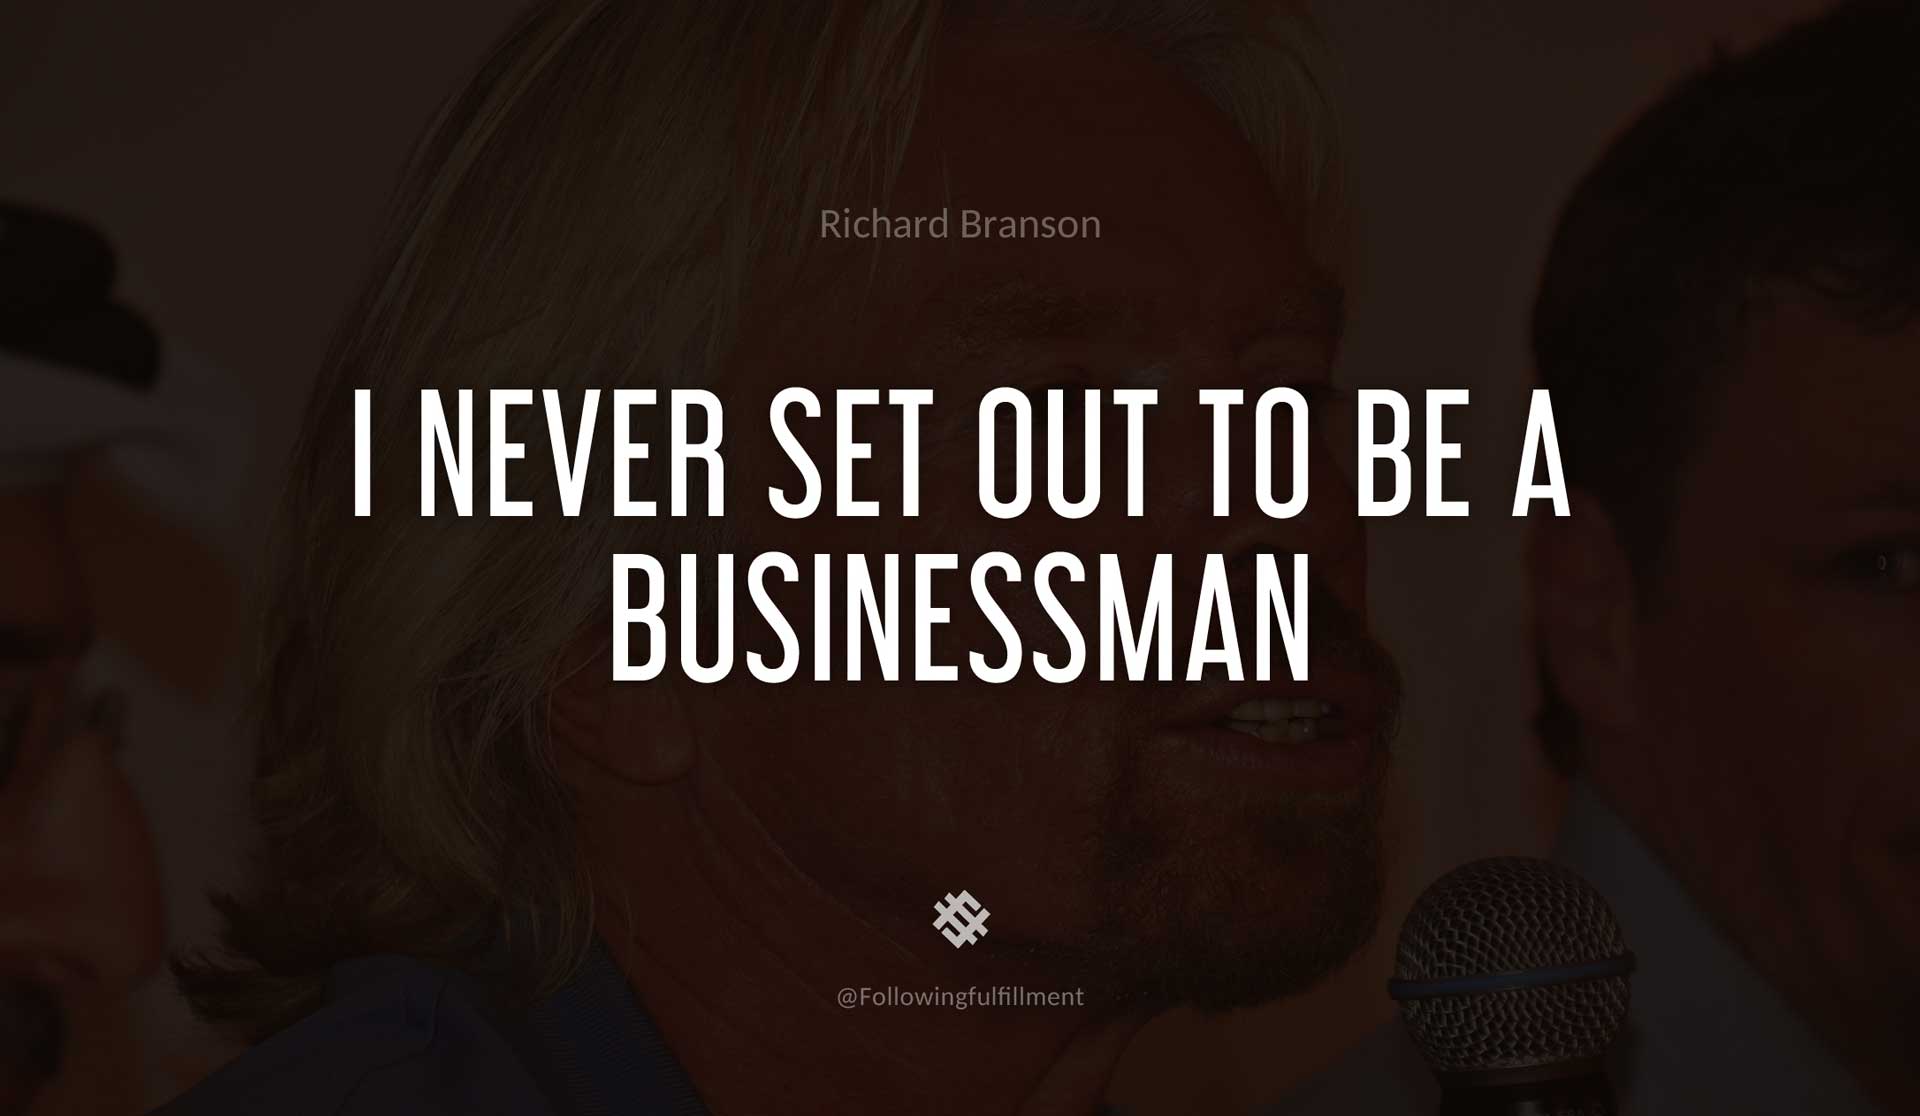 I-never-set-out-to-be-a-businessman-RICHARD-BRANSON-Quote.jpg